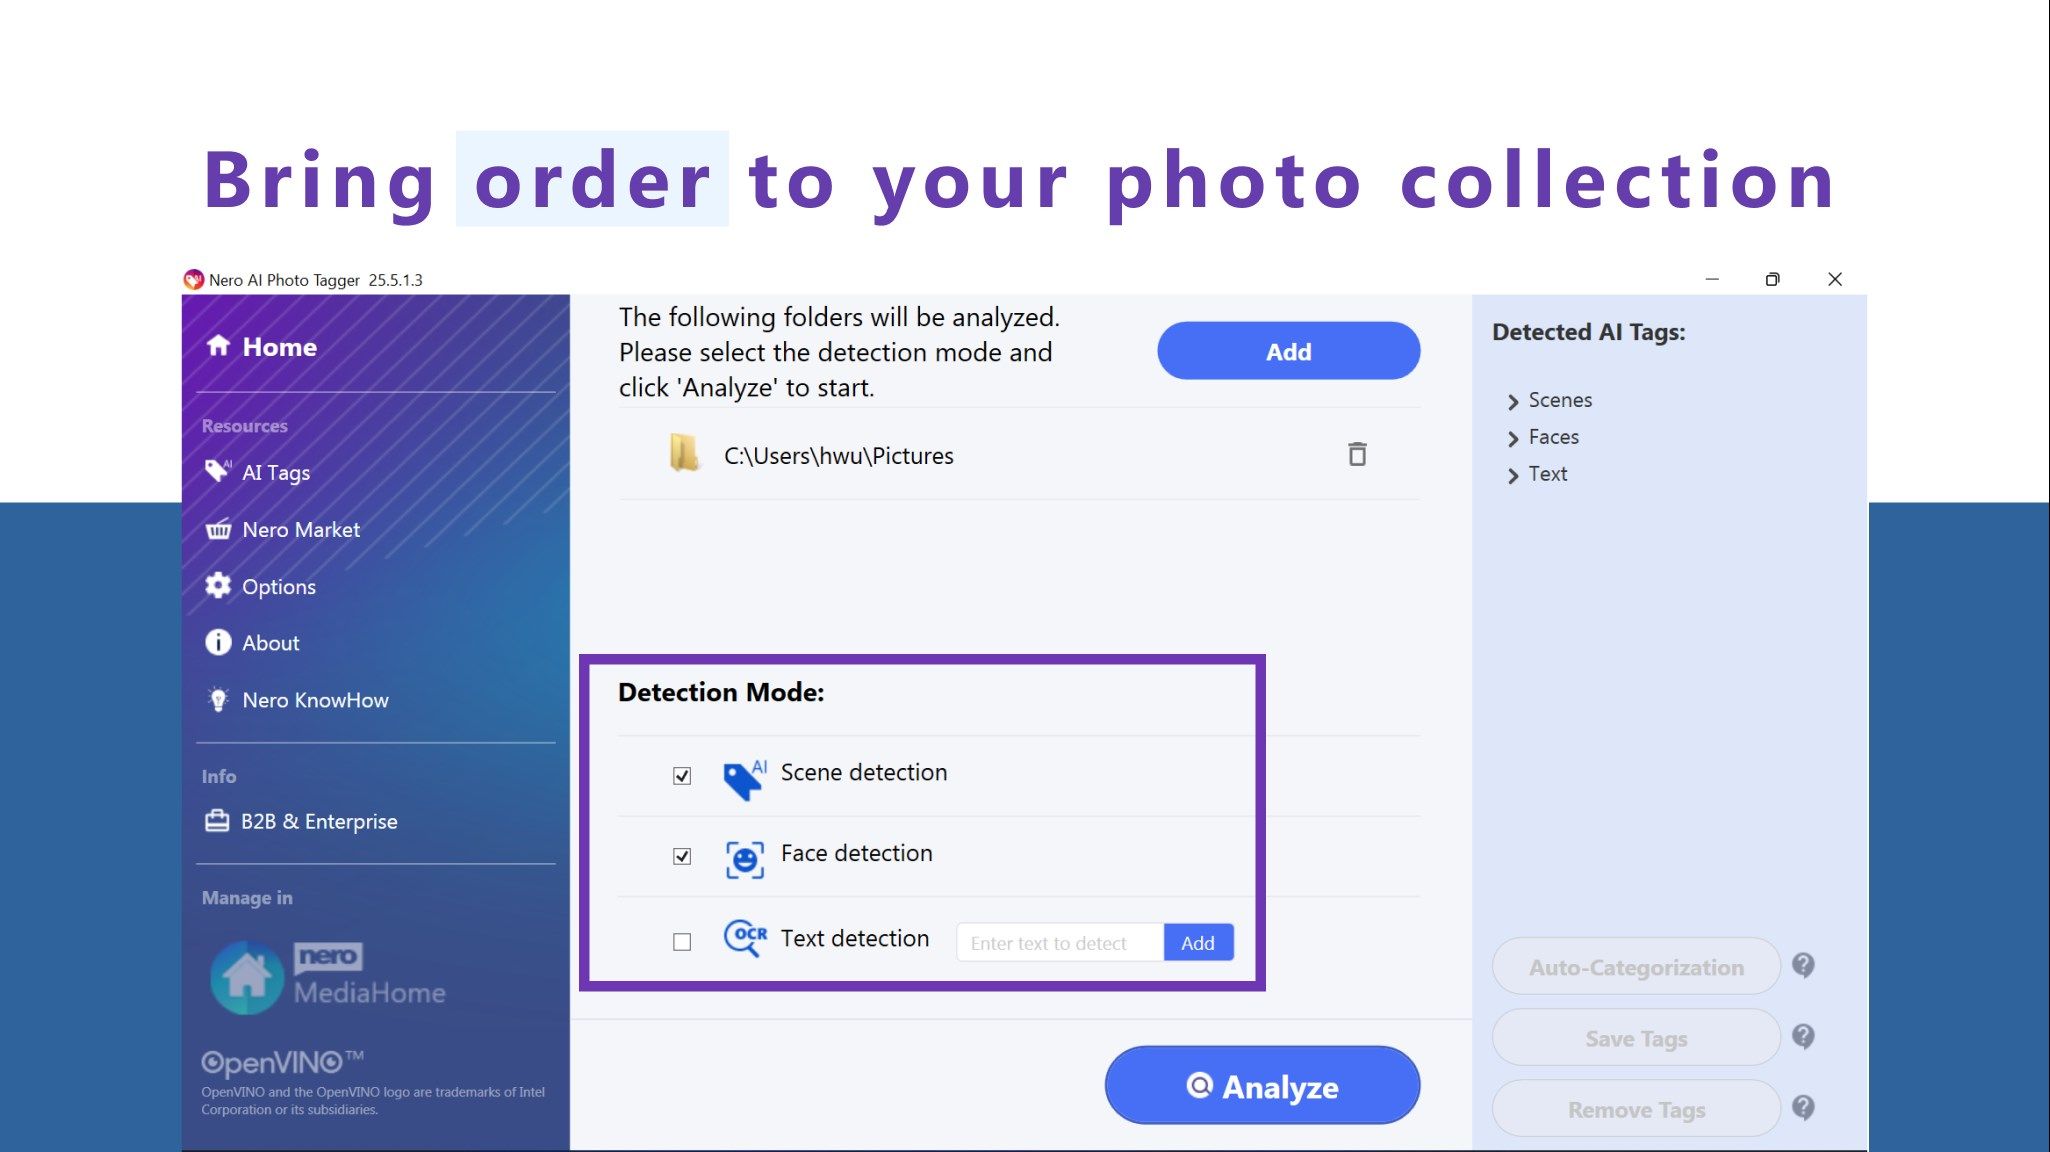 Bring order to your photo collection